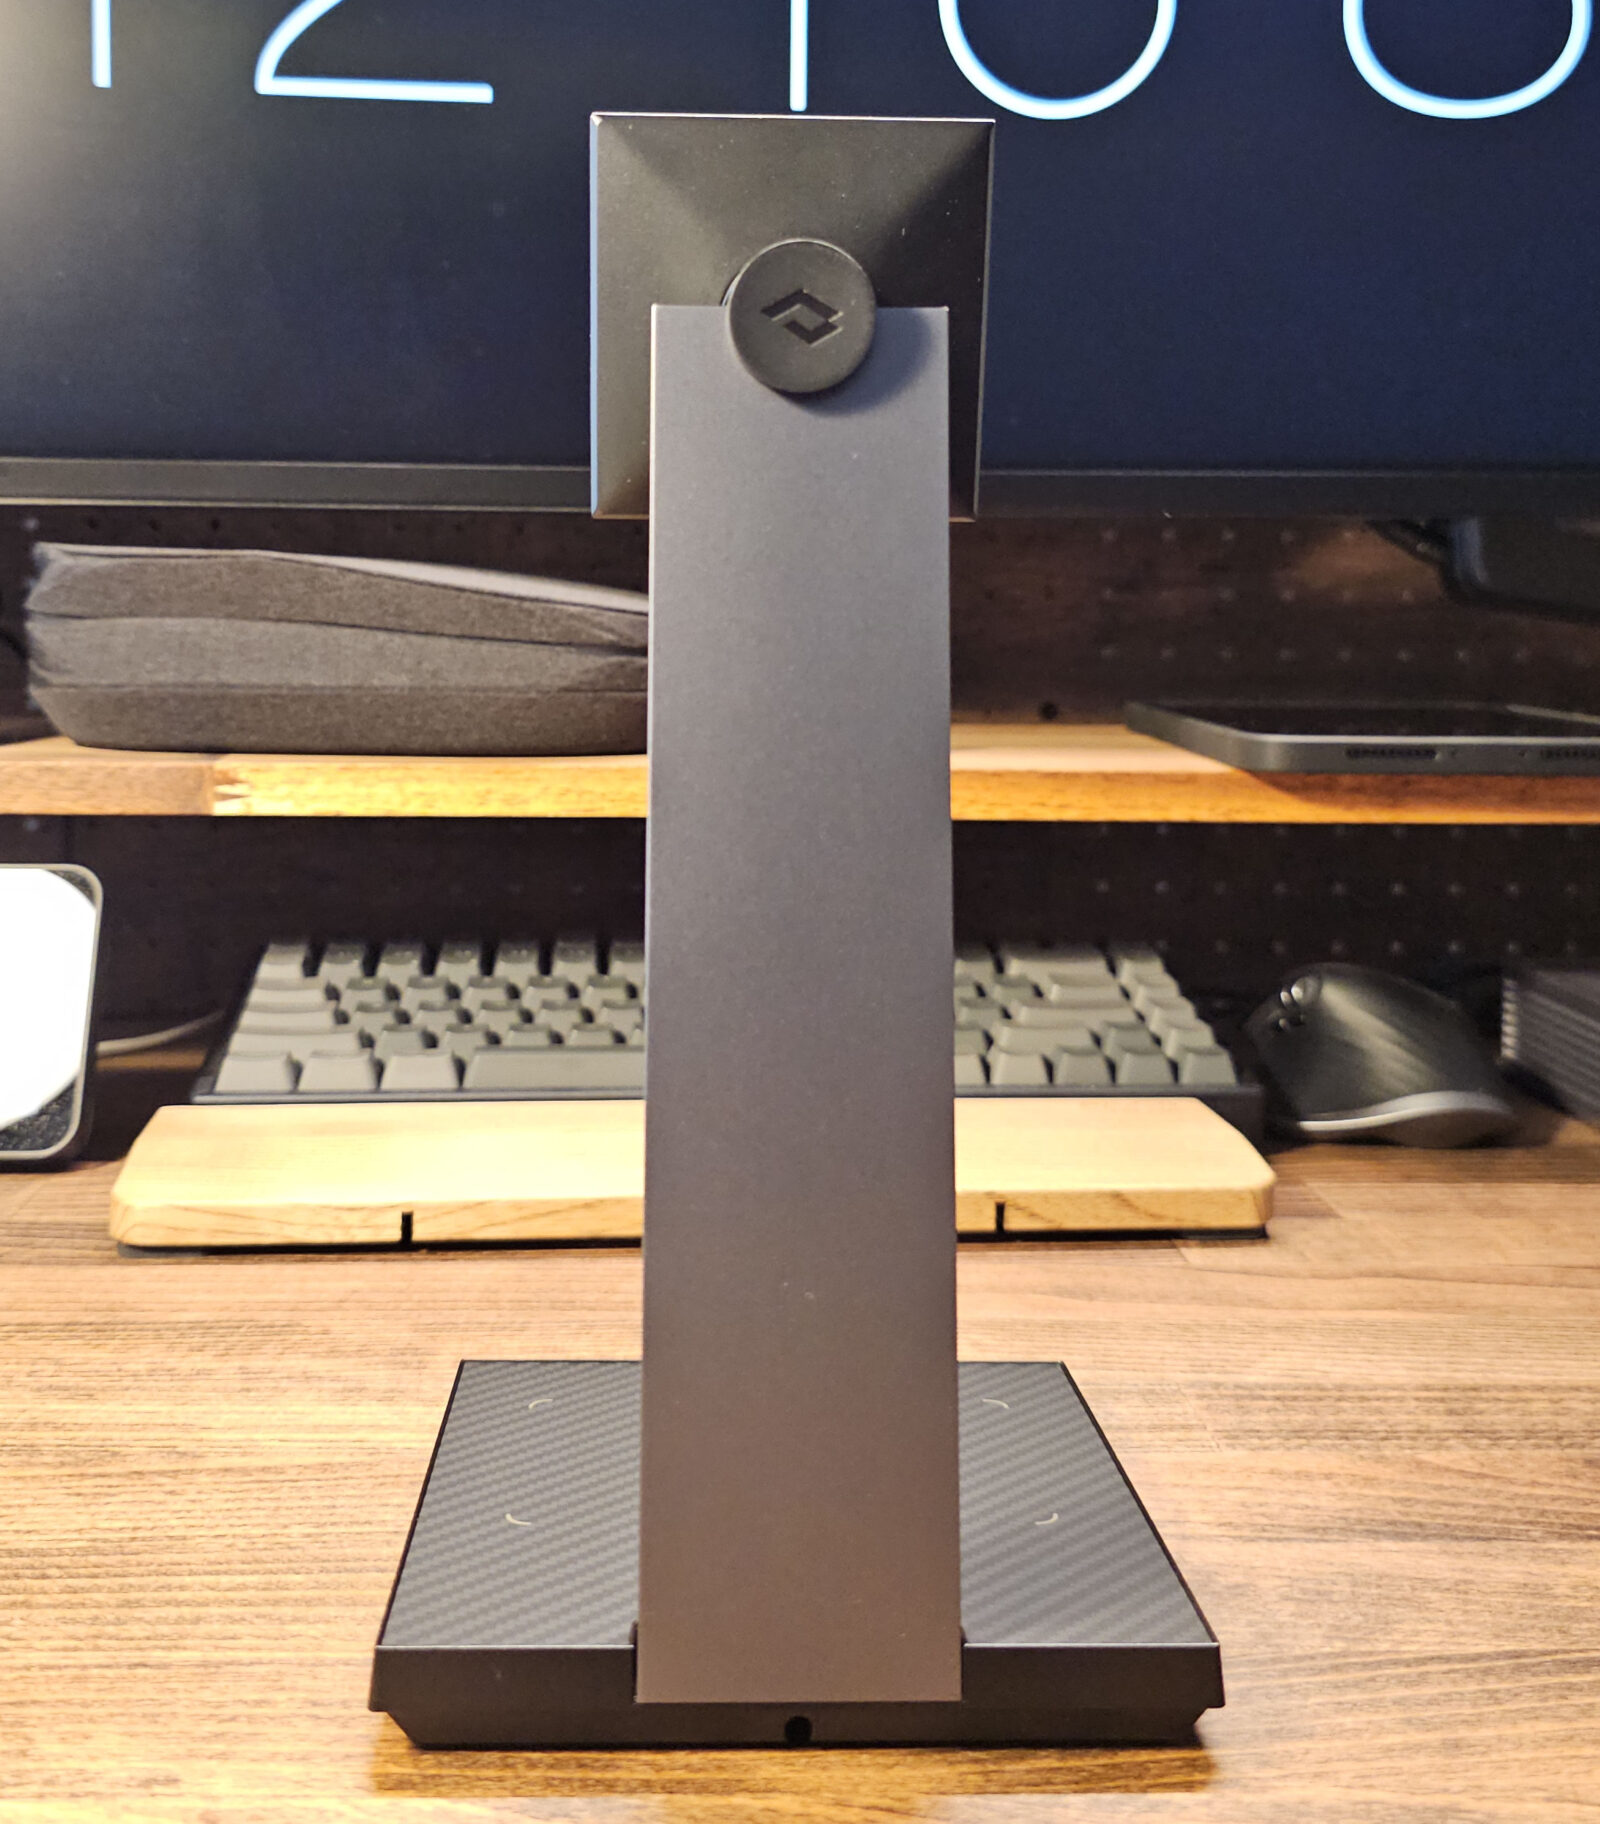 MagEZ Charging Stand for Tablets